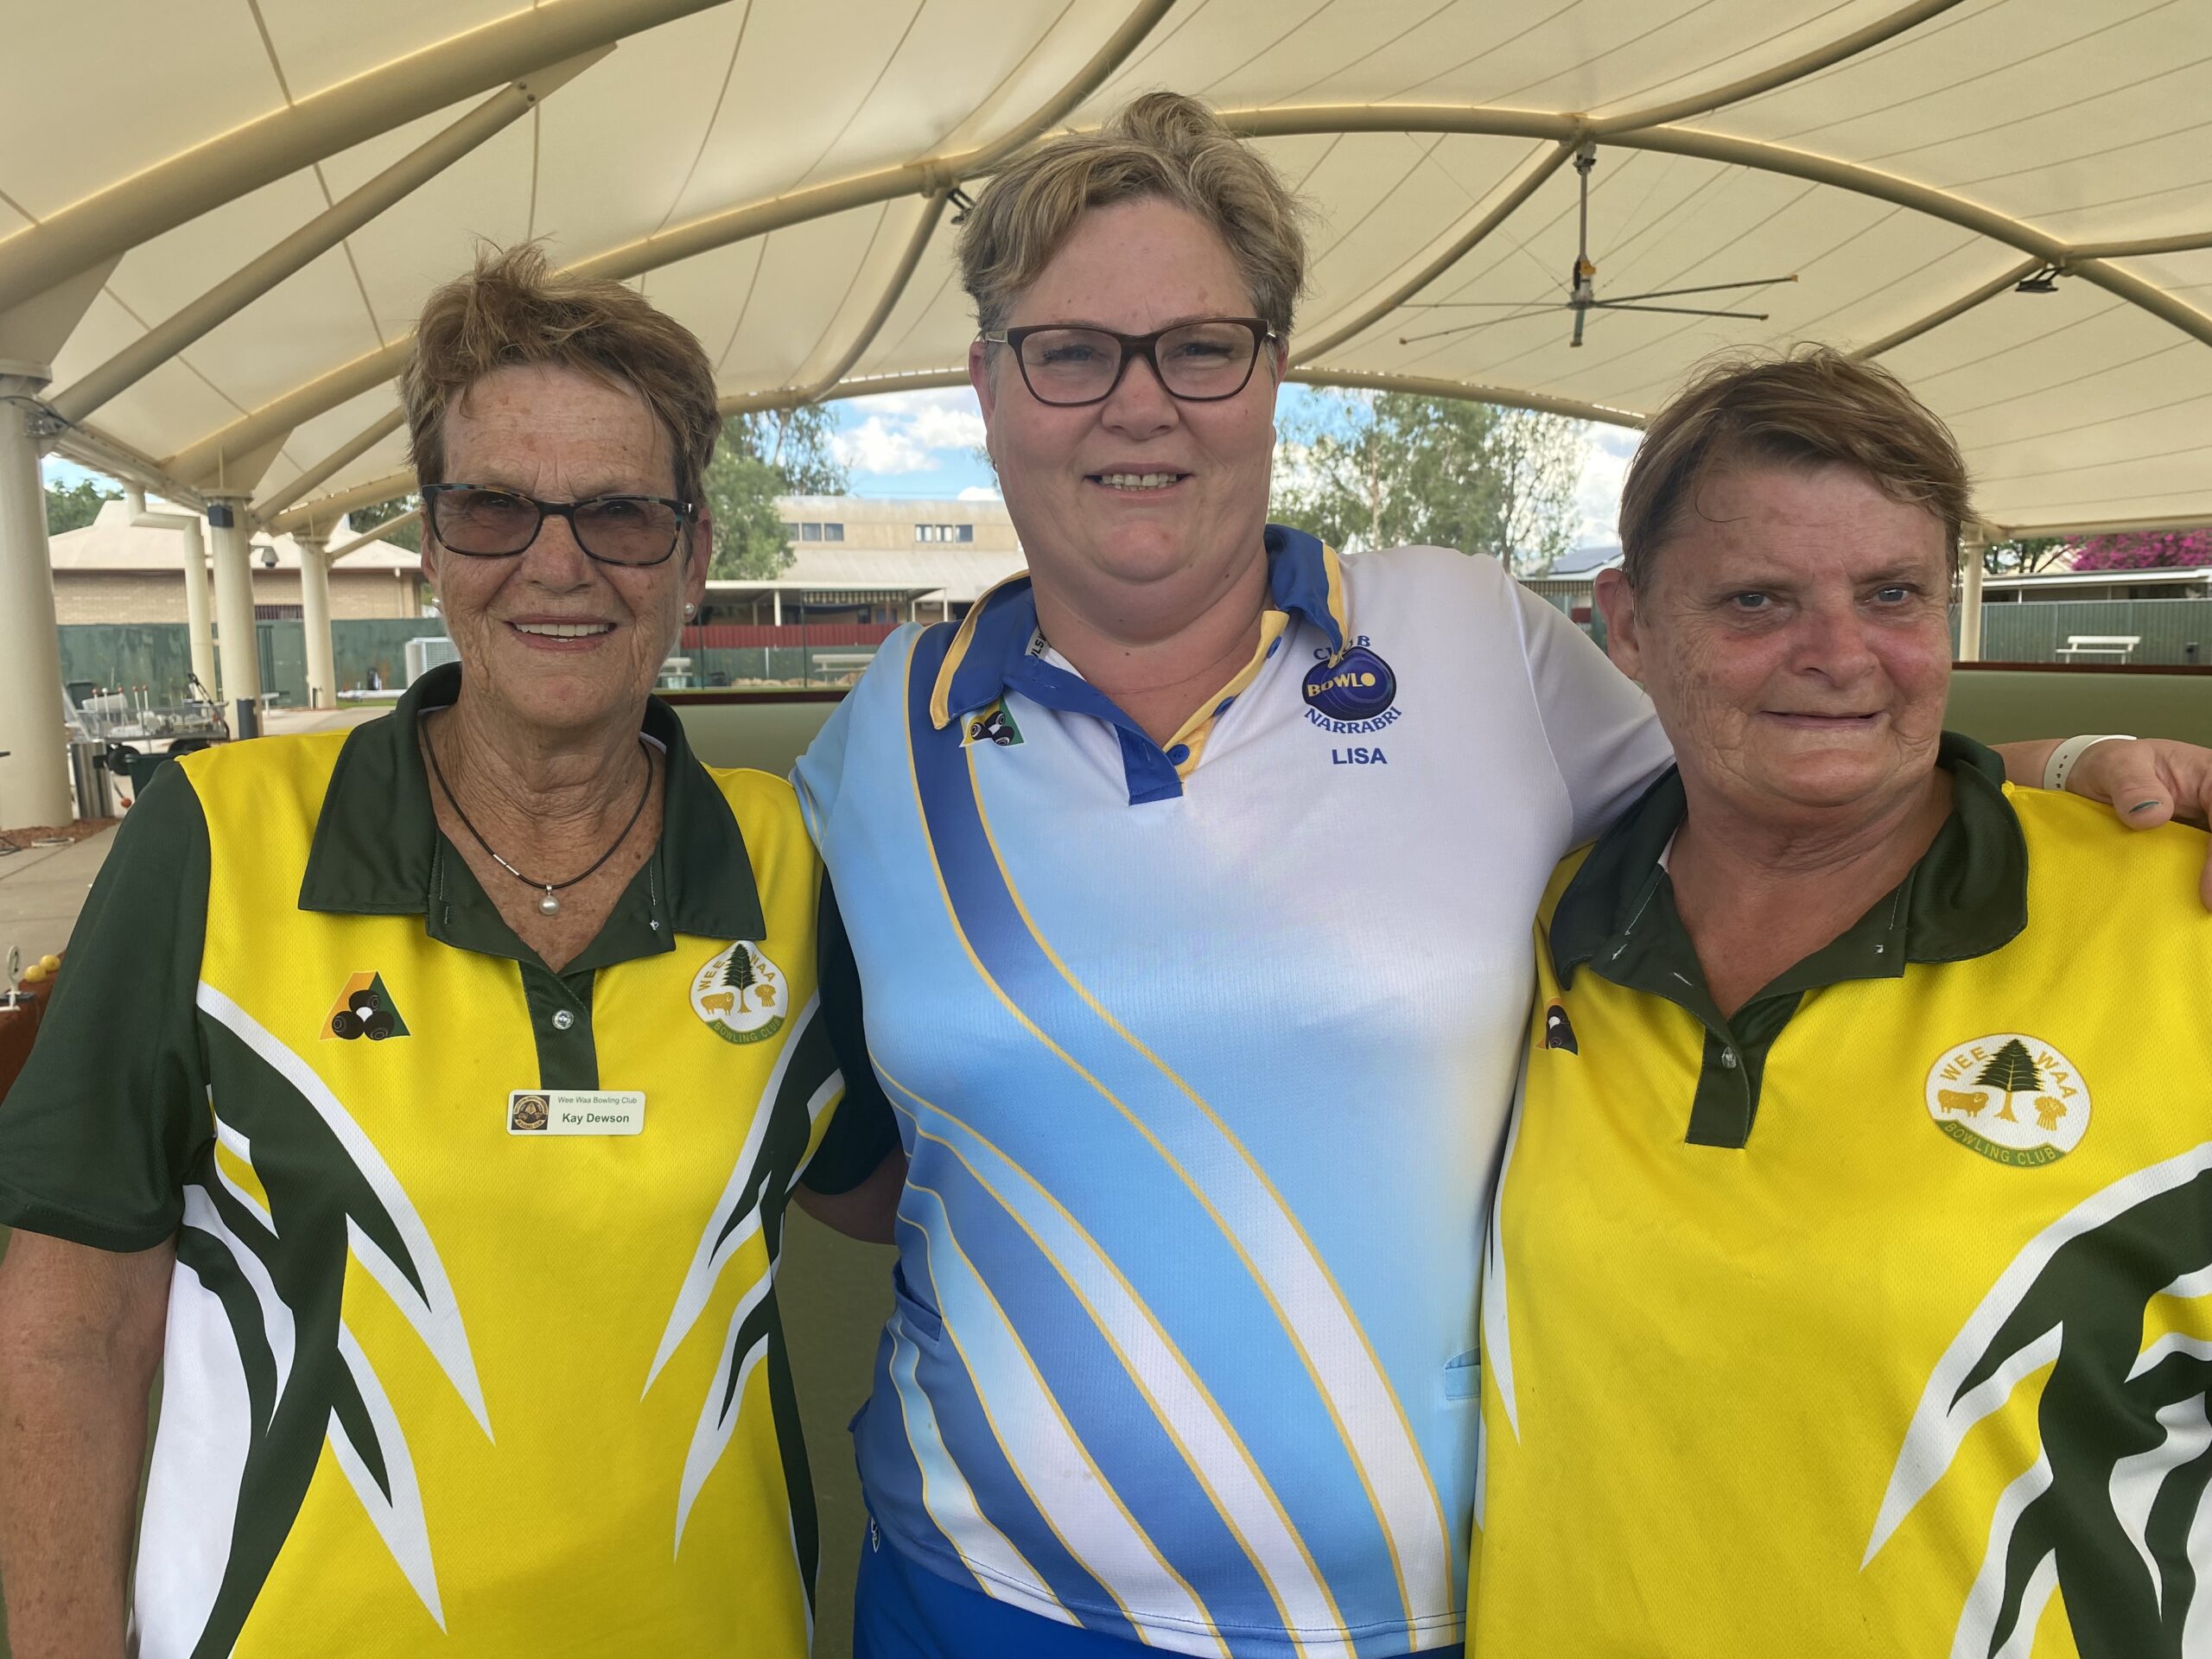 Local trio qualify for Bowls NSW’s 2023/24 season State Championships playoffs